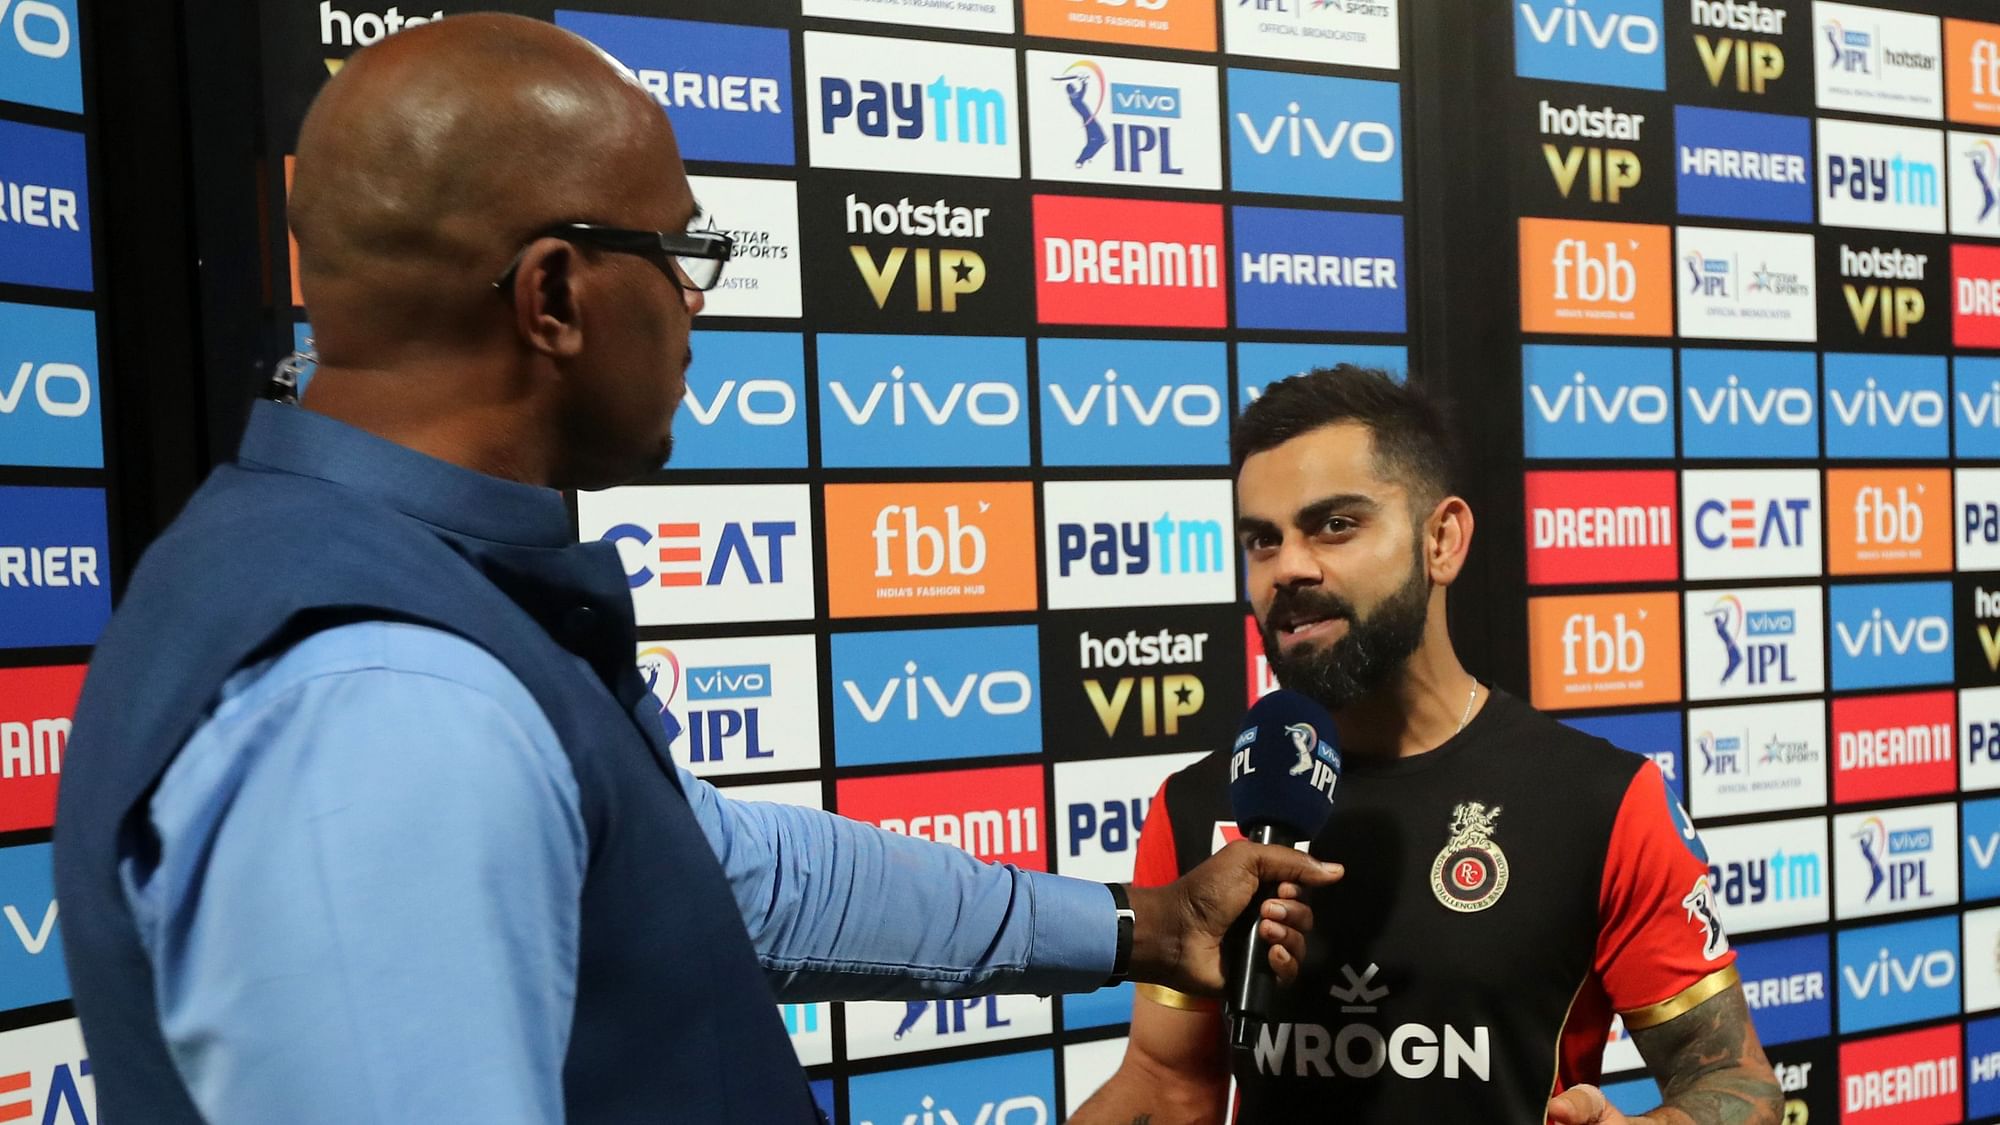 Virat Kohli was all praise for MS Dhoni after the CSK skipper nearly pulled off another massive chase.